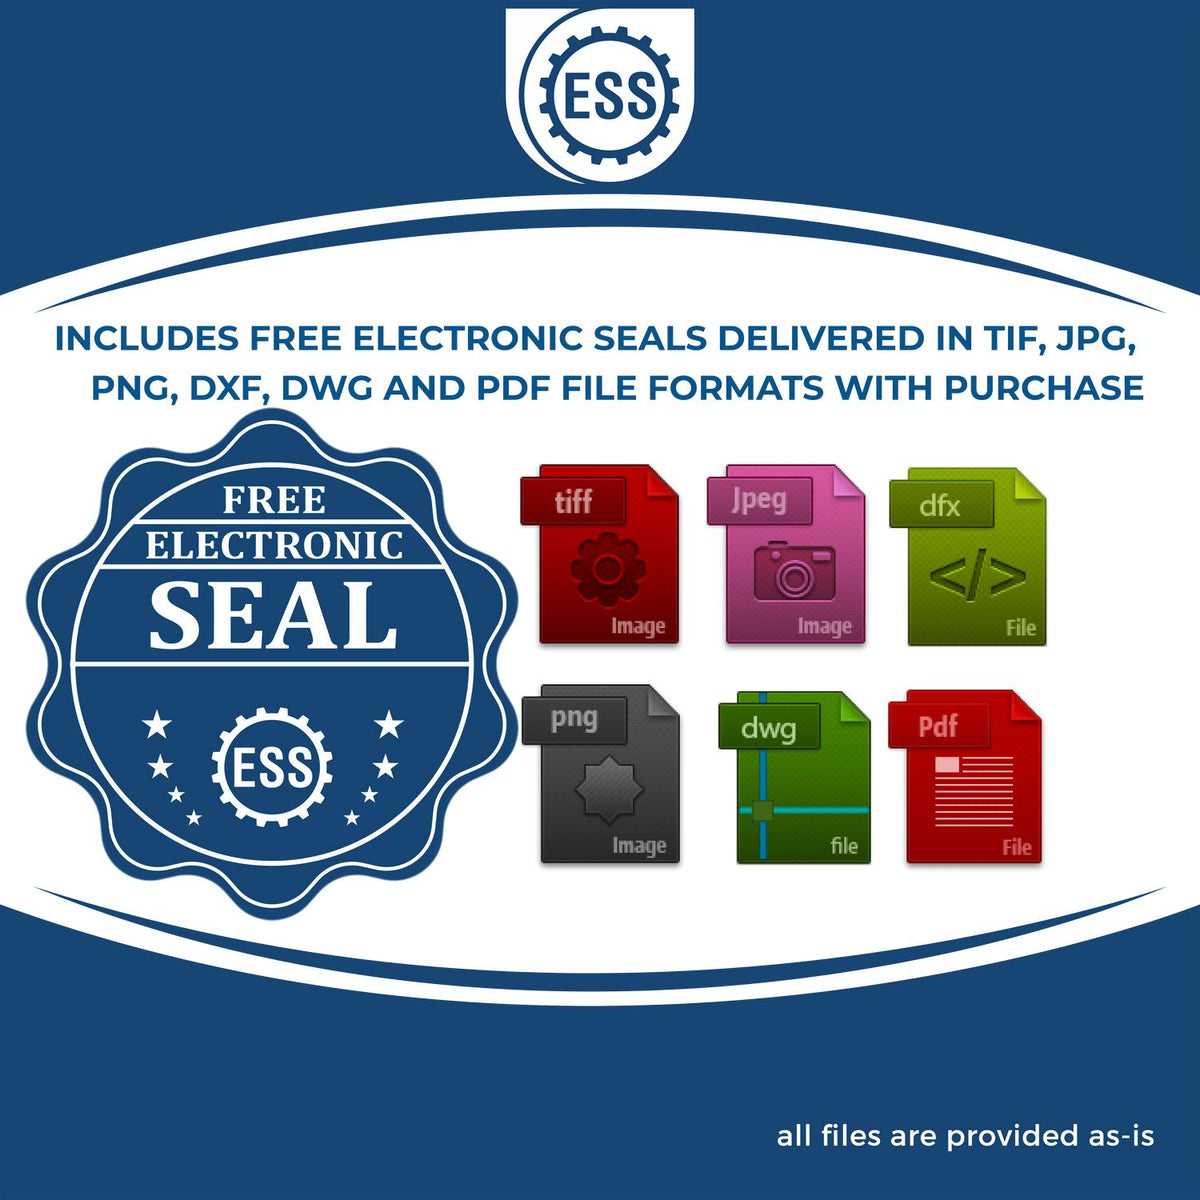 An infographic for the free electronic seal for the State of Illinois Extended Long Reach Engineer Seal illustrating the different file type icons such as DXF, DWG, TIF, JPG and PNG.